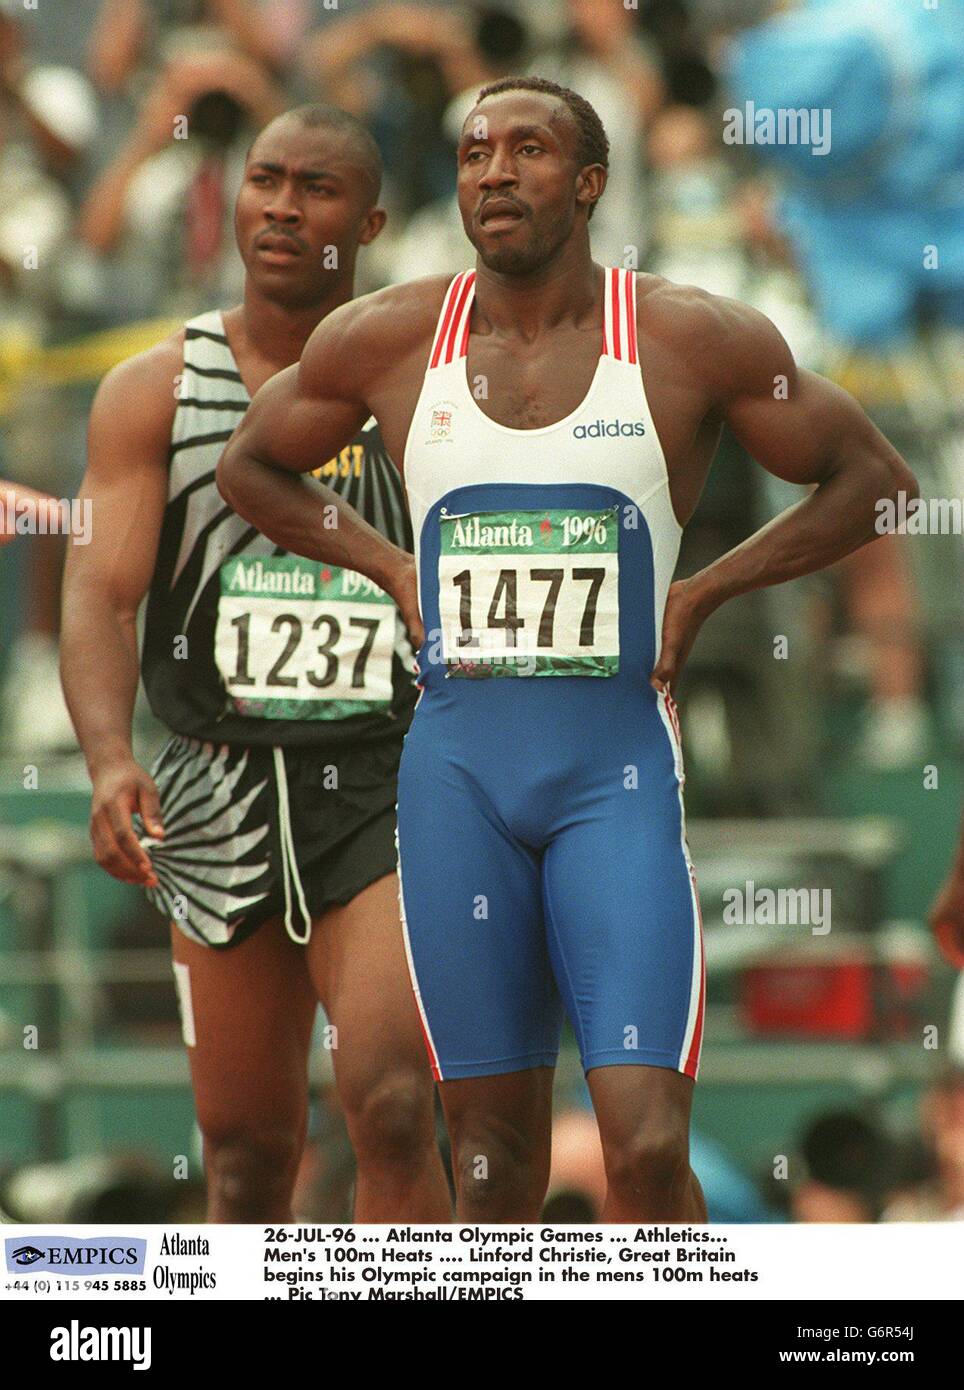 26-JUL-96, Atlanta Olympic Games, Athletics. Men's 100m Heats, Linford Christie, Great Britain begins his Olympic campaign in the mens 100m heats Stock Photo